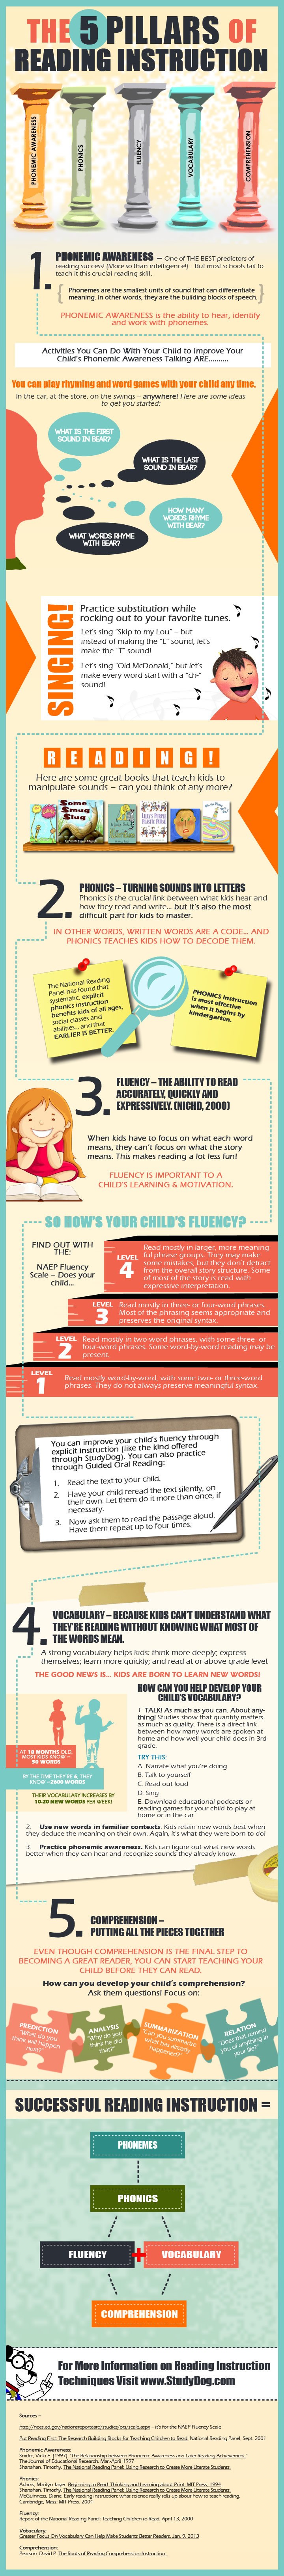 The 5 Pillars of Successful Reading Instruction Infographic